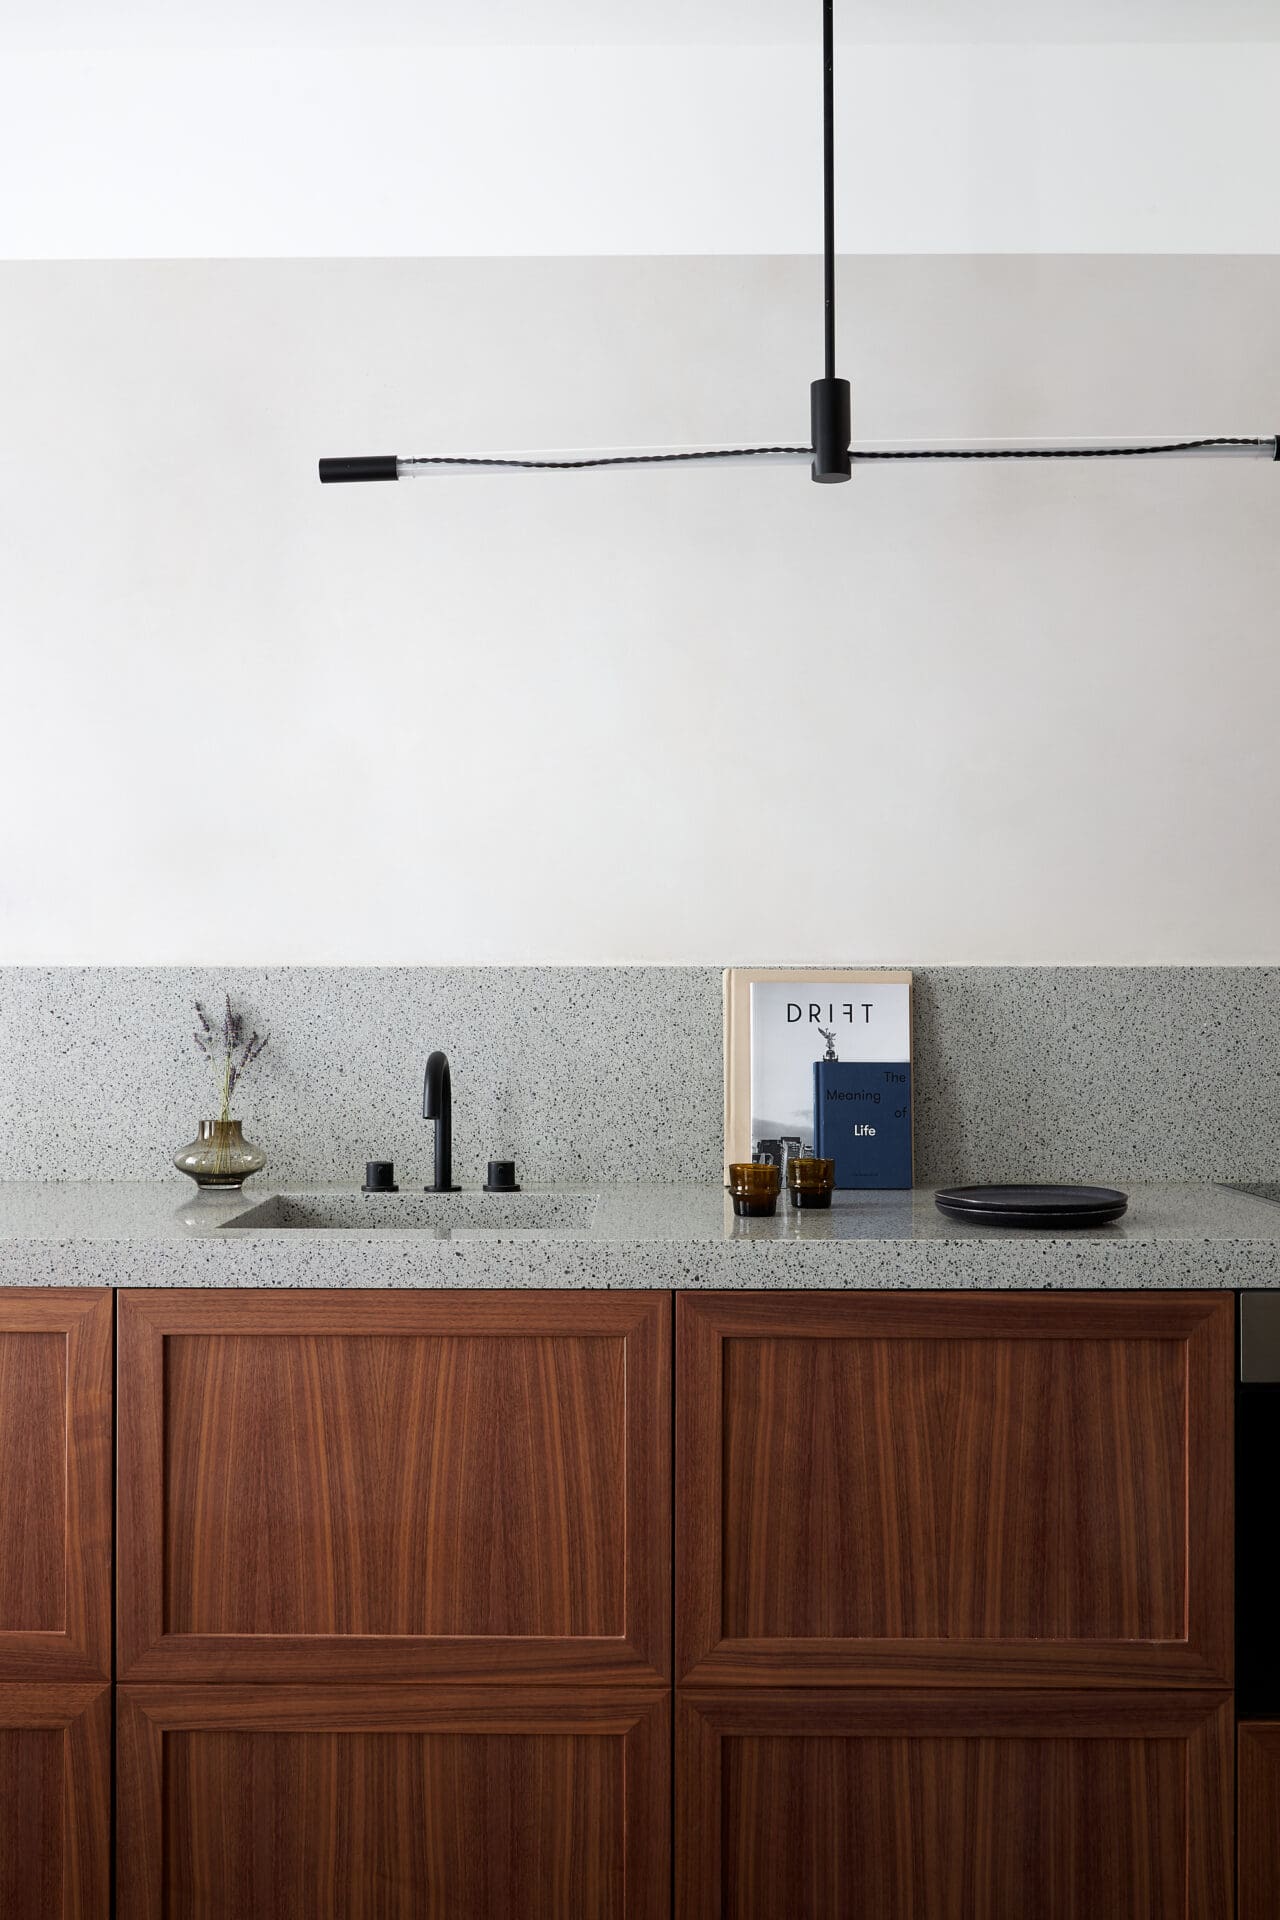 Best hotels in Shoreditch, Dalston and Hackney | A view of a kitchenette in one of the rooms at Kingsland Locke in Dalston, London. A sculptural light hangs from the ceiling, and a small sink in a terrazzo counter can be seen, with a copy of Drift magazine perched against the wall.